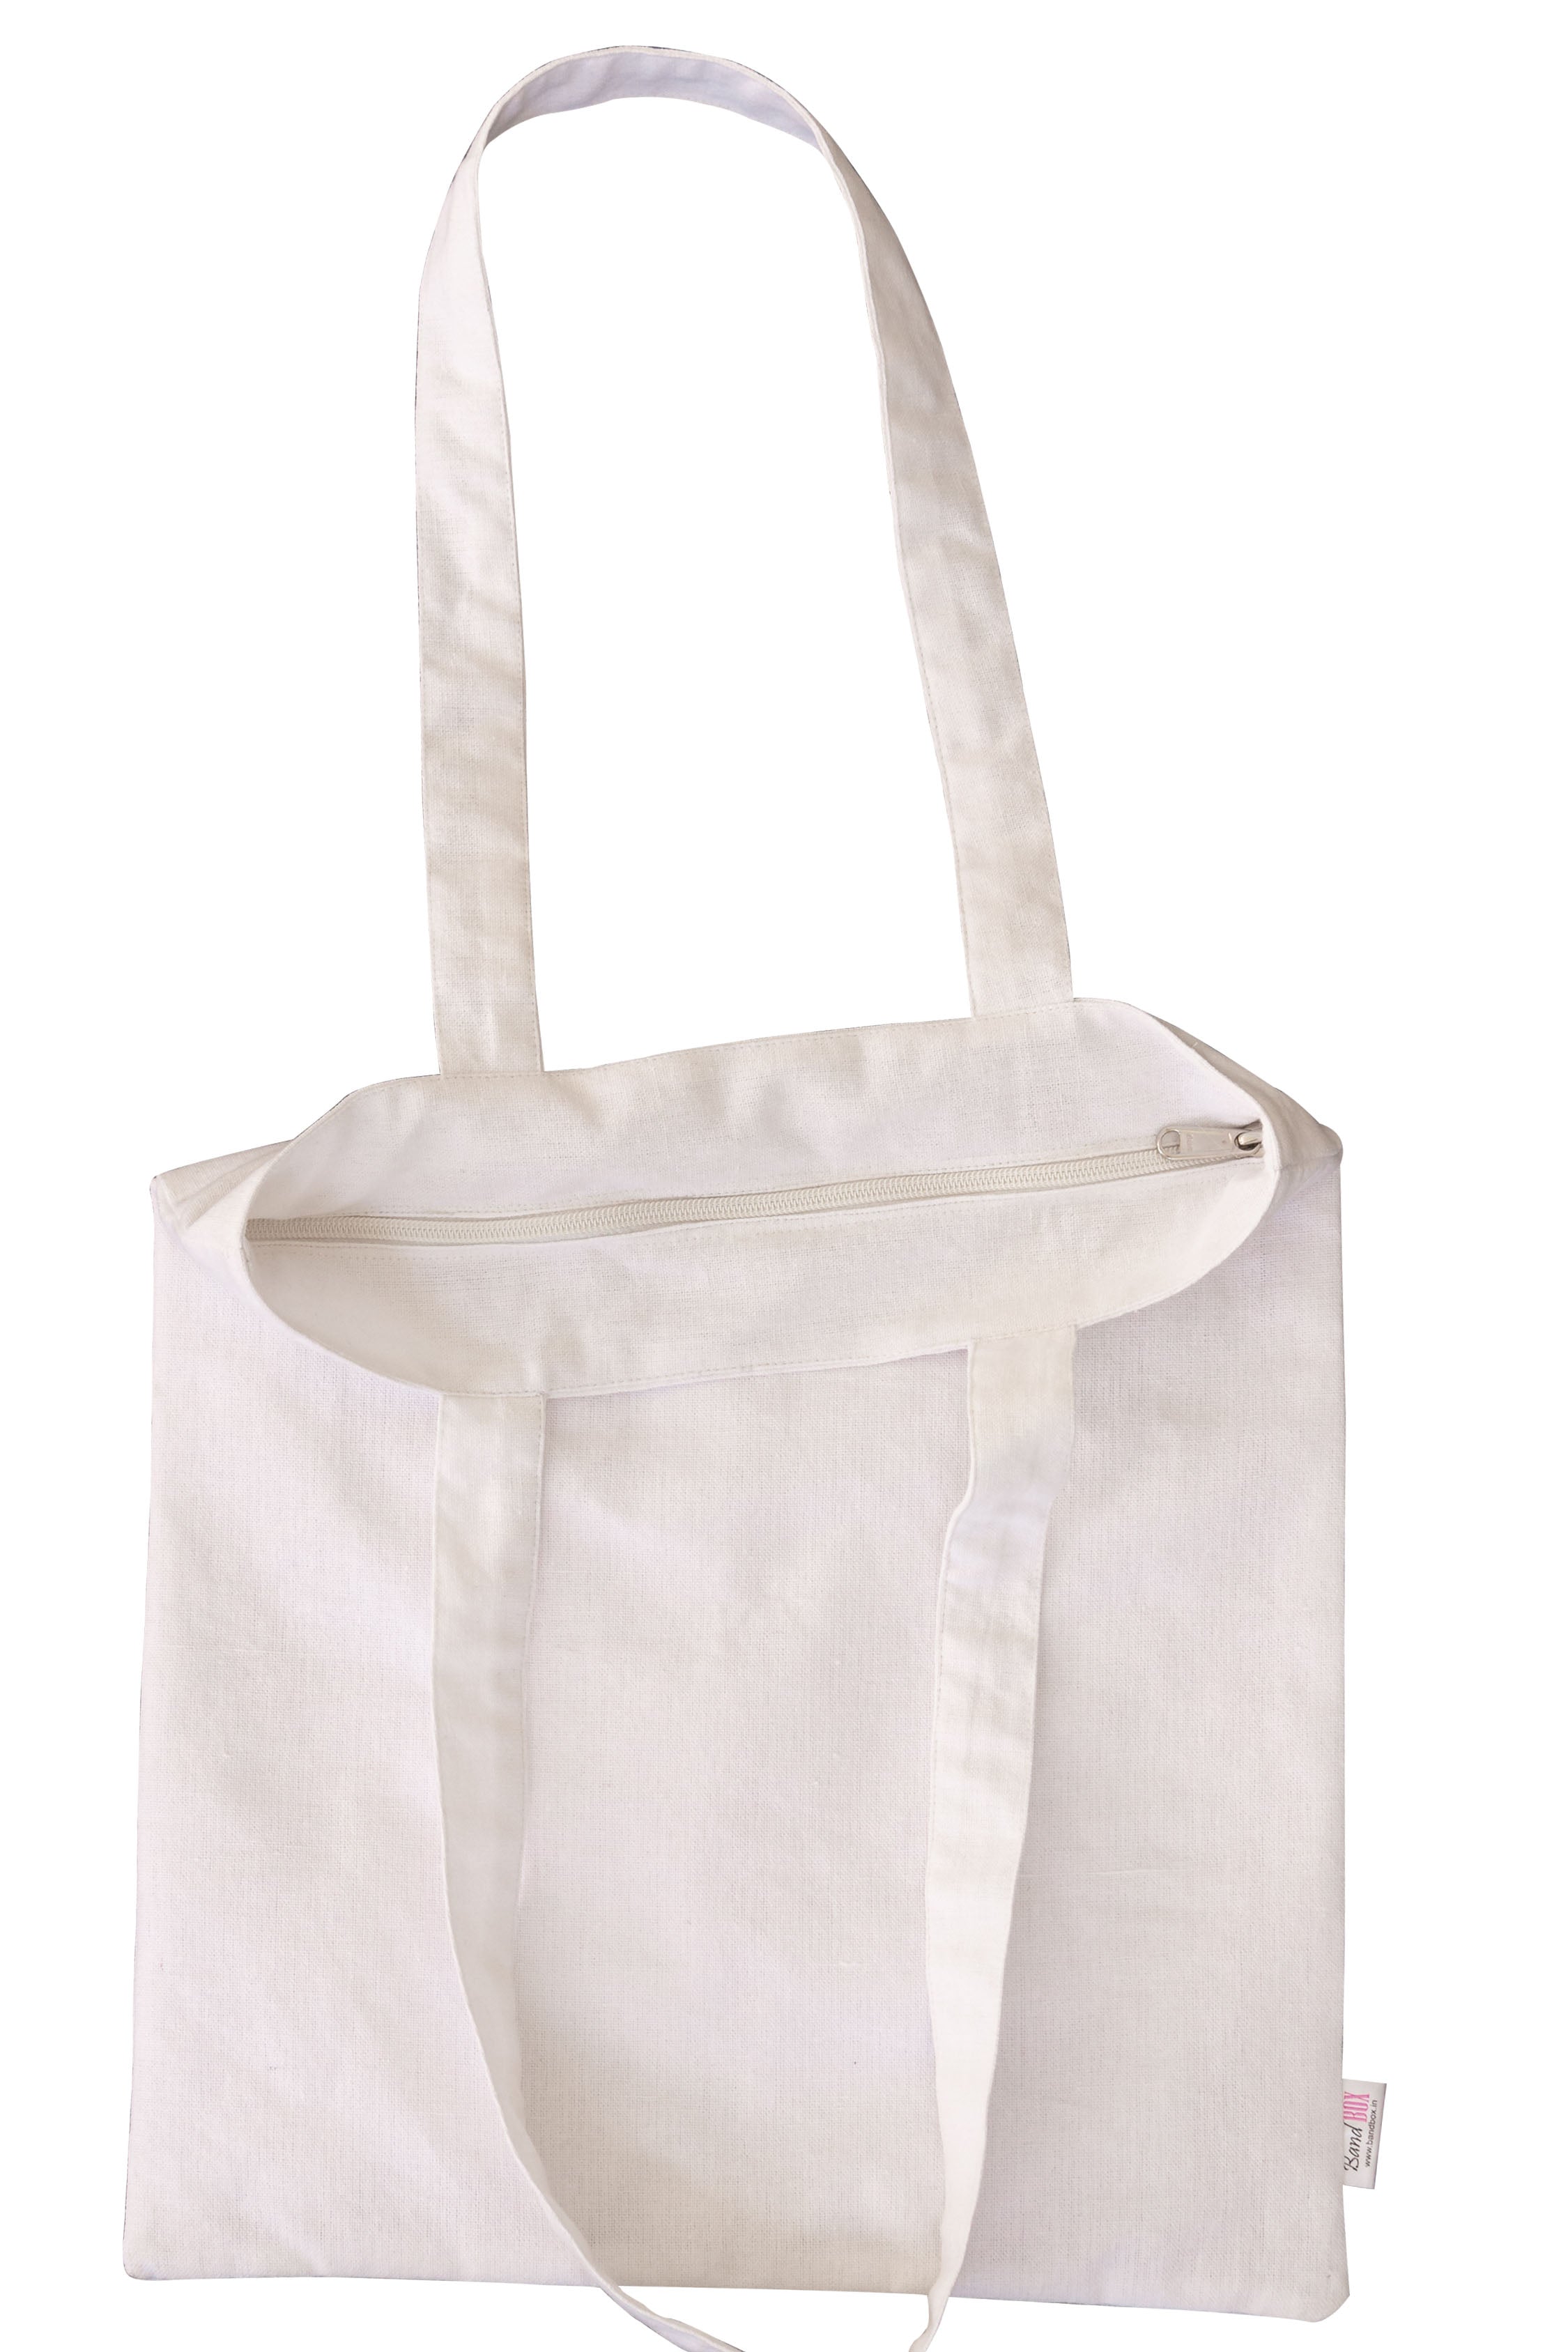 Eat The Cake Cotton Tote Bag